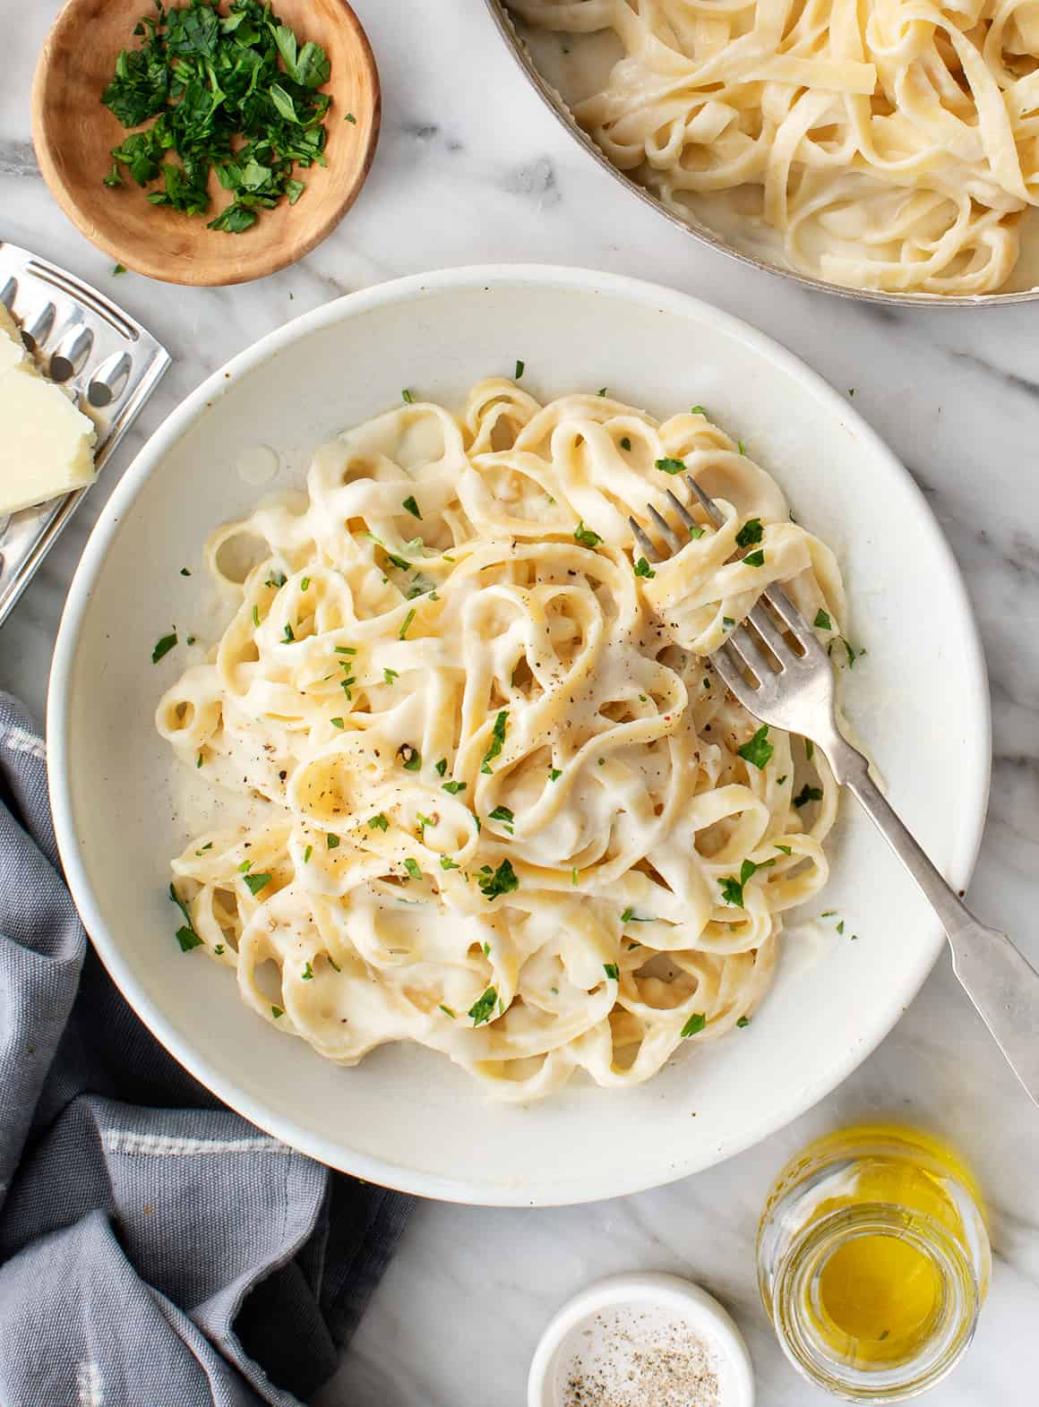 How to Make Fettuccine from Scratch?